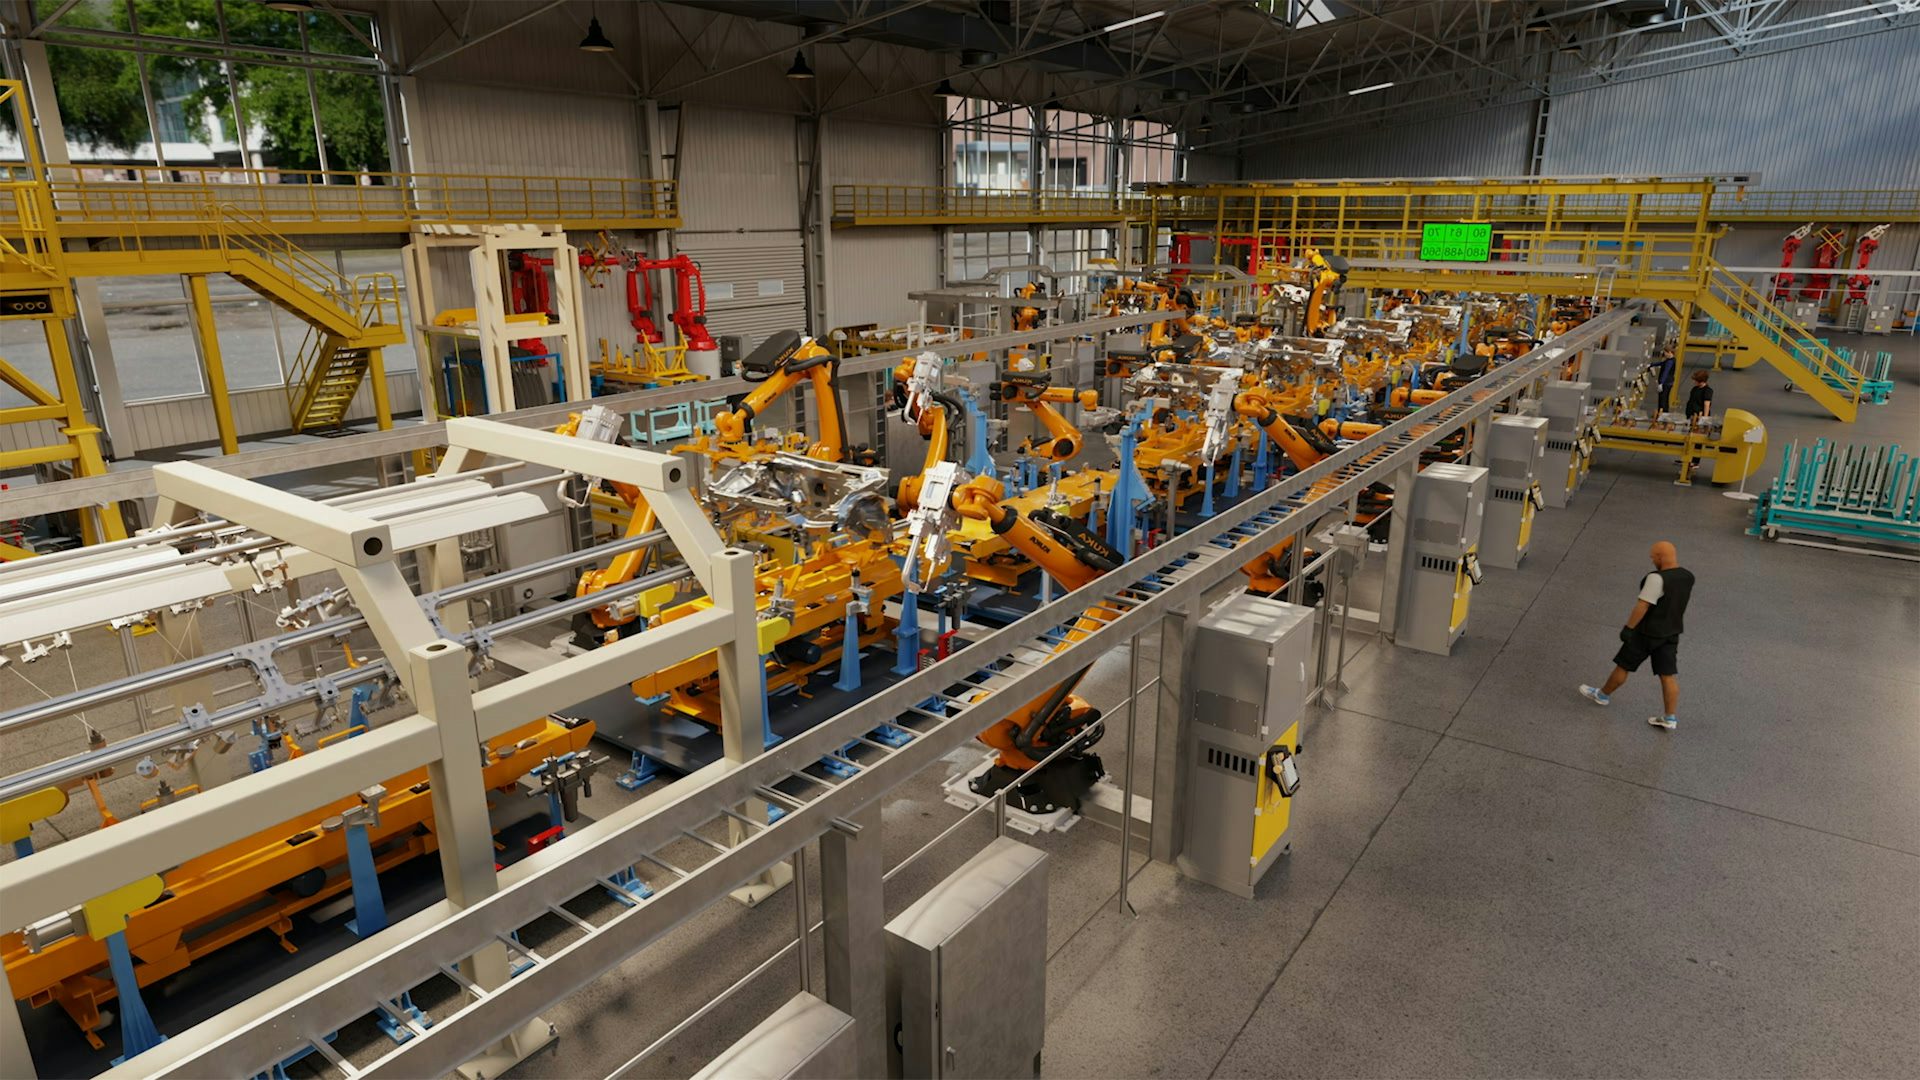 Photorealistic image rendering of a virtual automobile body assembly line created using Siemens and NVIDIA software technology.